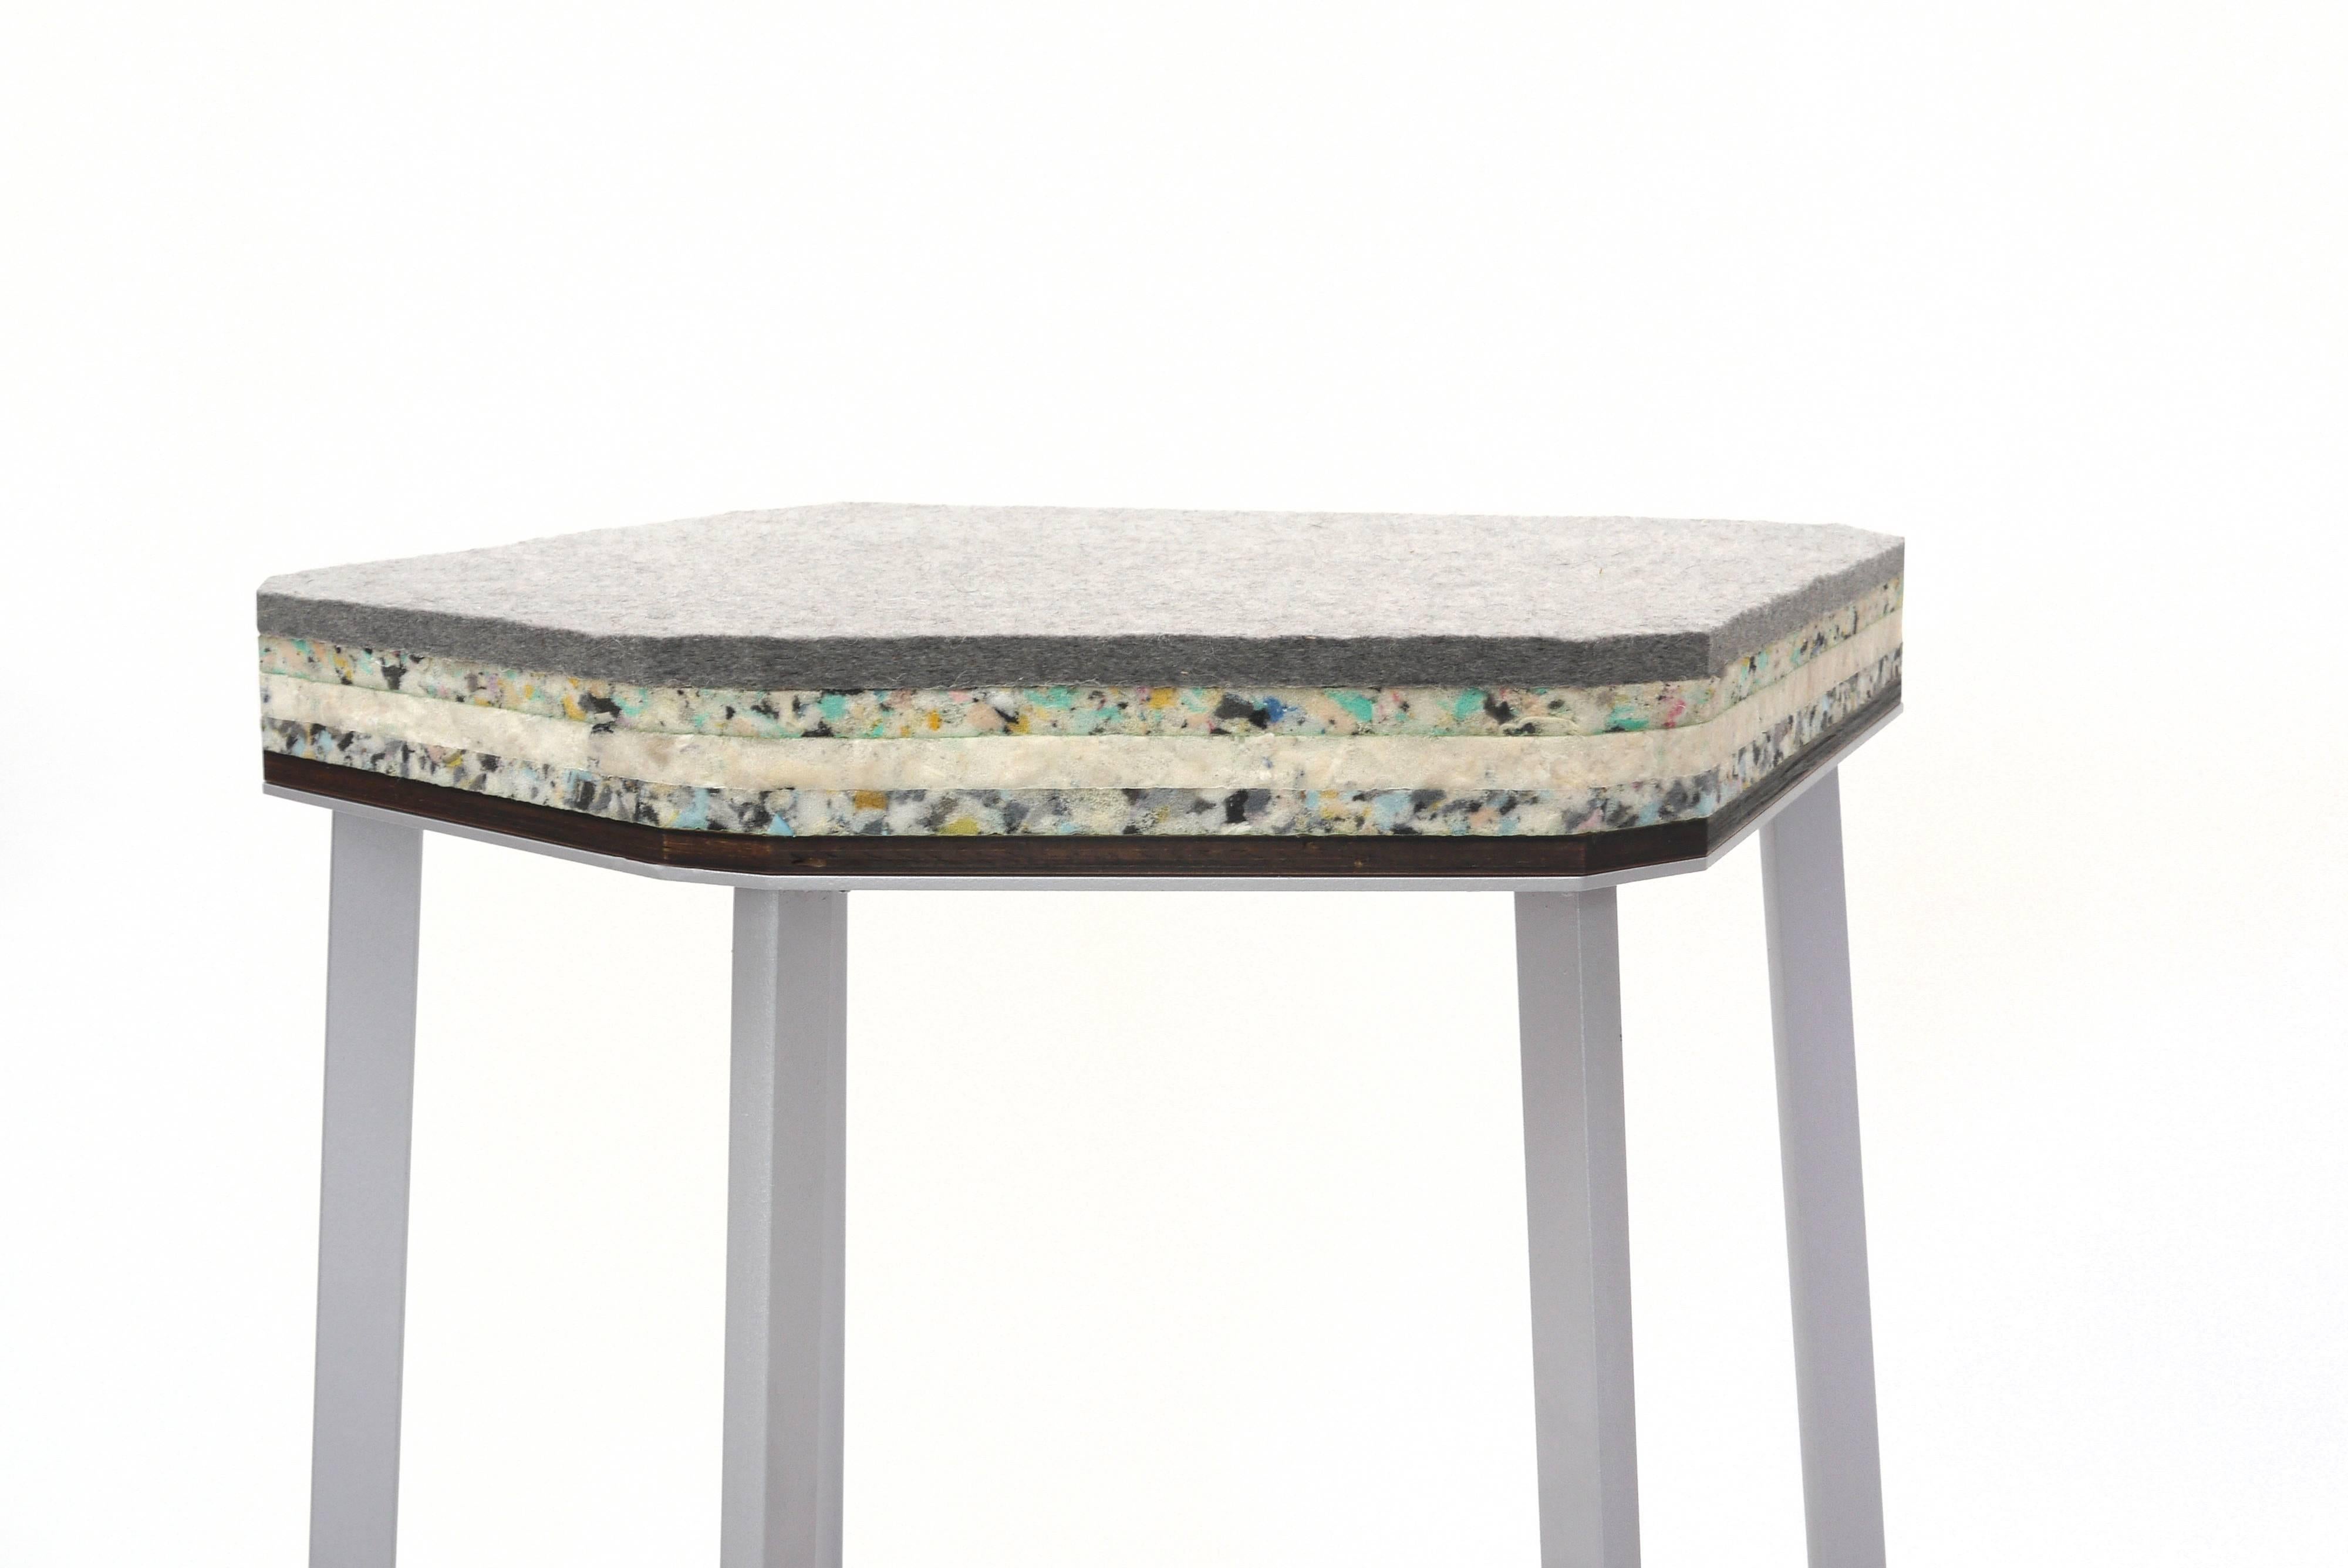 Strata is comprised of a powder coated or plated steel base with an ultra plush seat cushion created from rebonded latex foams and 100% wool felt.